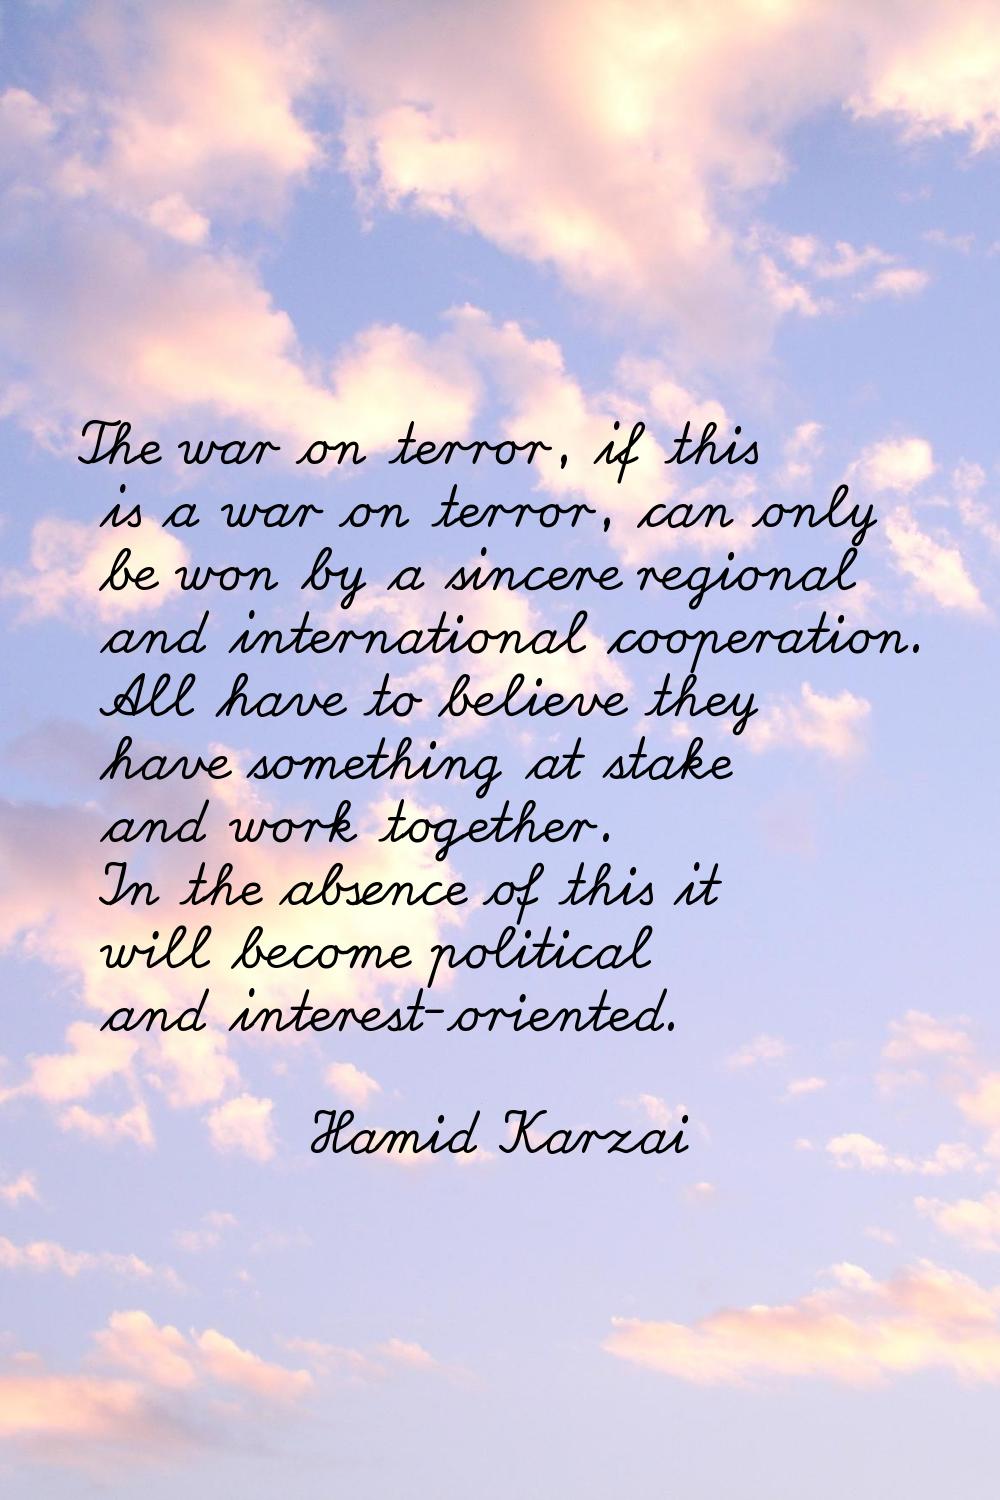 The war on terror, if this is a war on terror, can only be won by a sincere regional and internatio